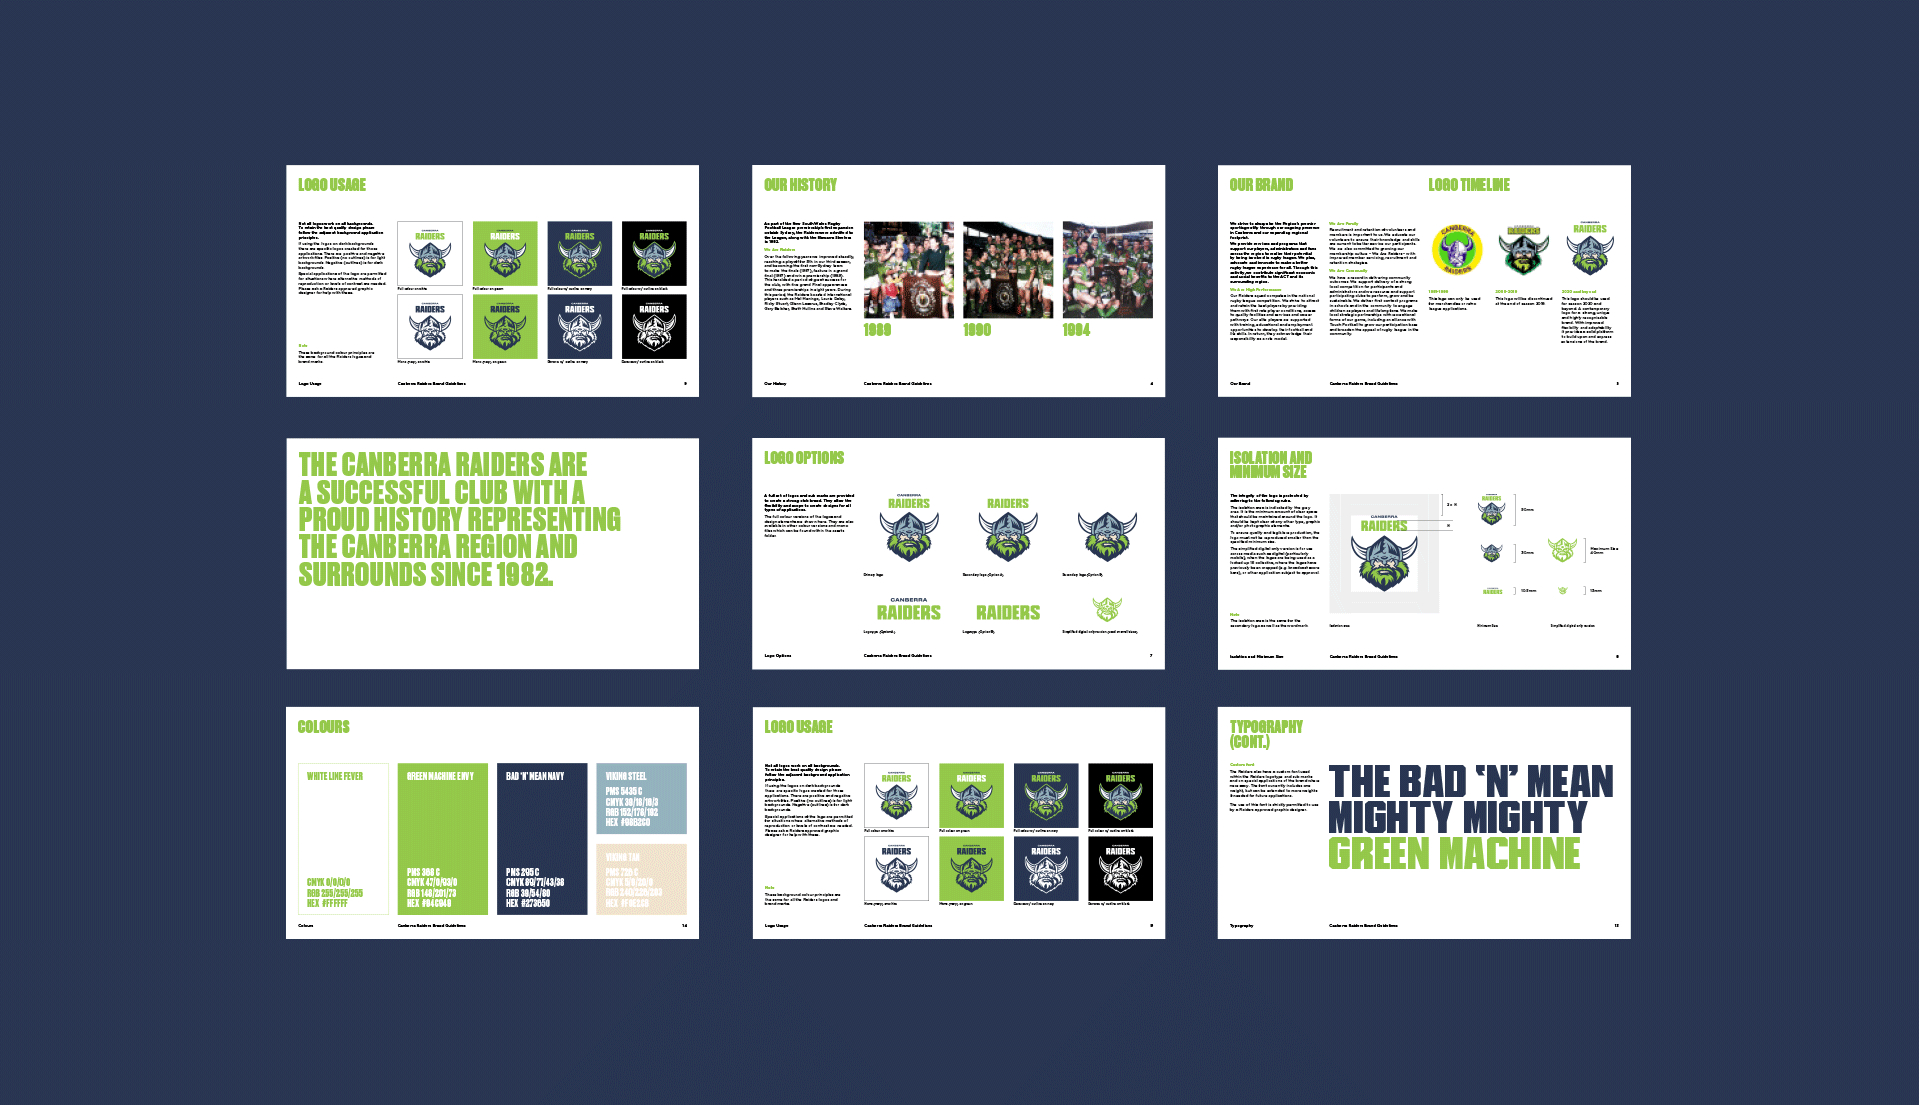 9 pages or screens from the brand refresh updated style guide.